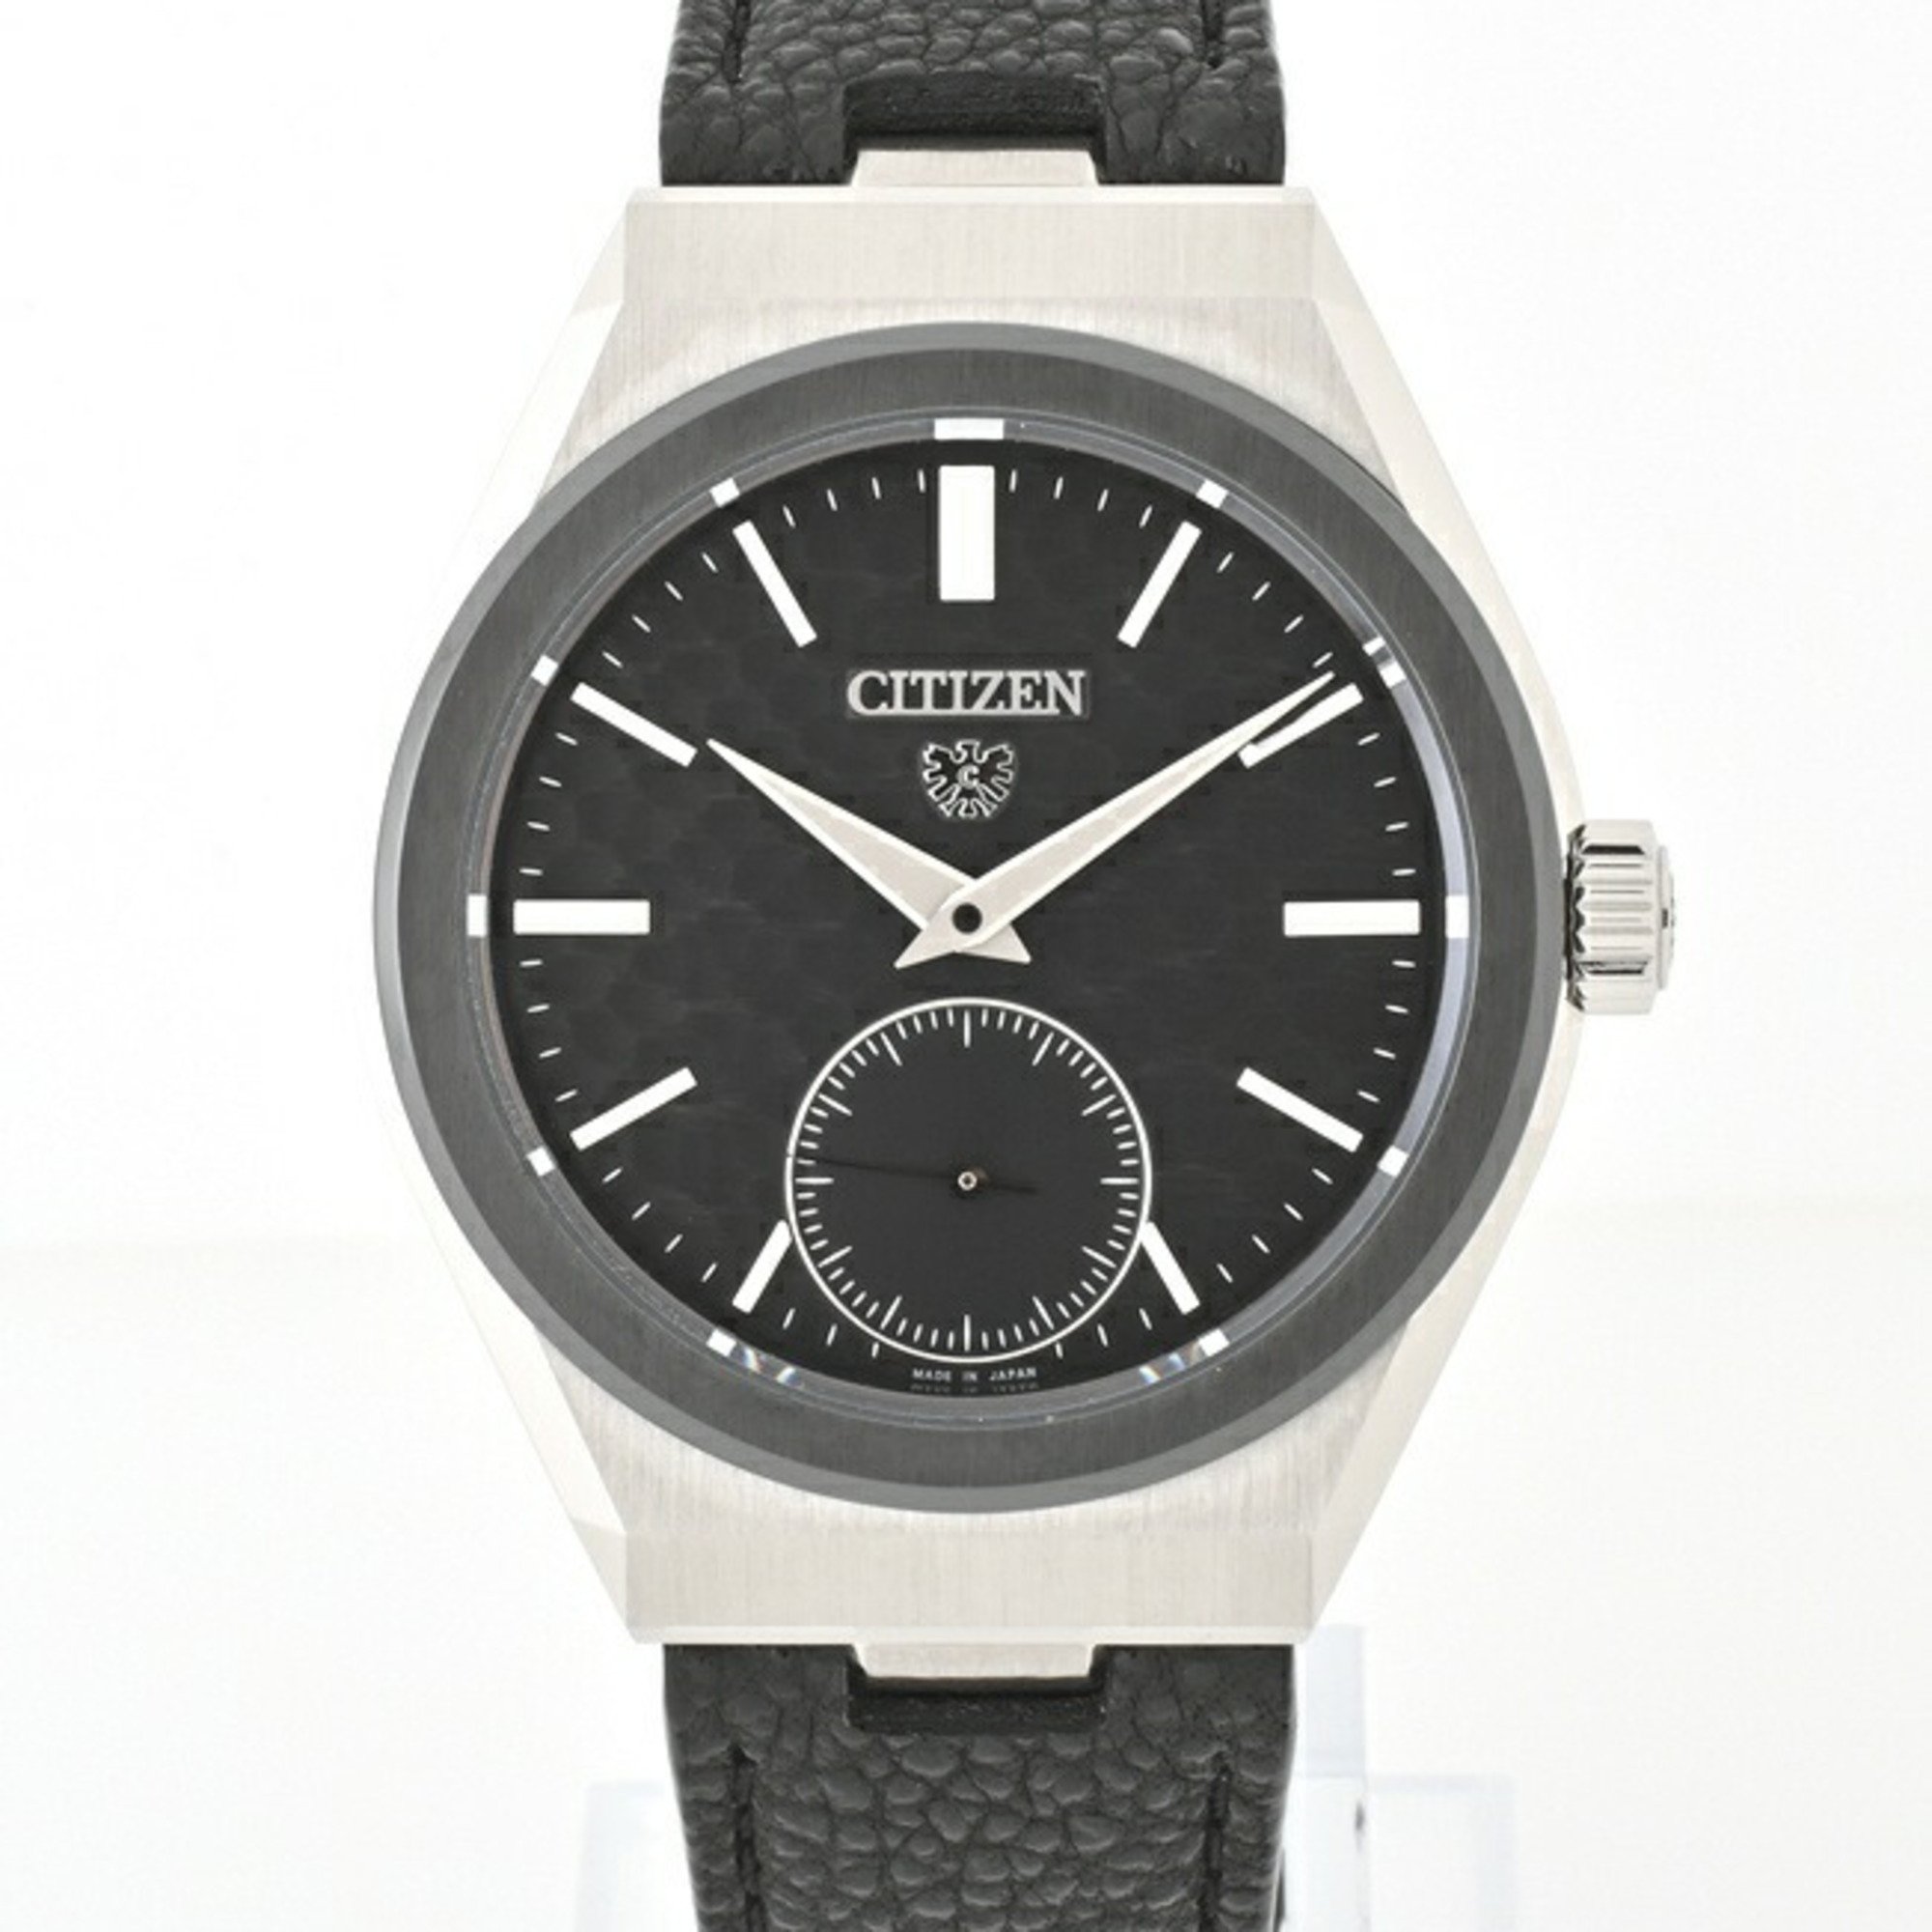 CITIZEN The Citizen NC0206-18E 0200-001XH01 Automatic watch Caliber 0200 Limited to 90 worldwide 69954